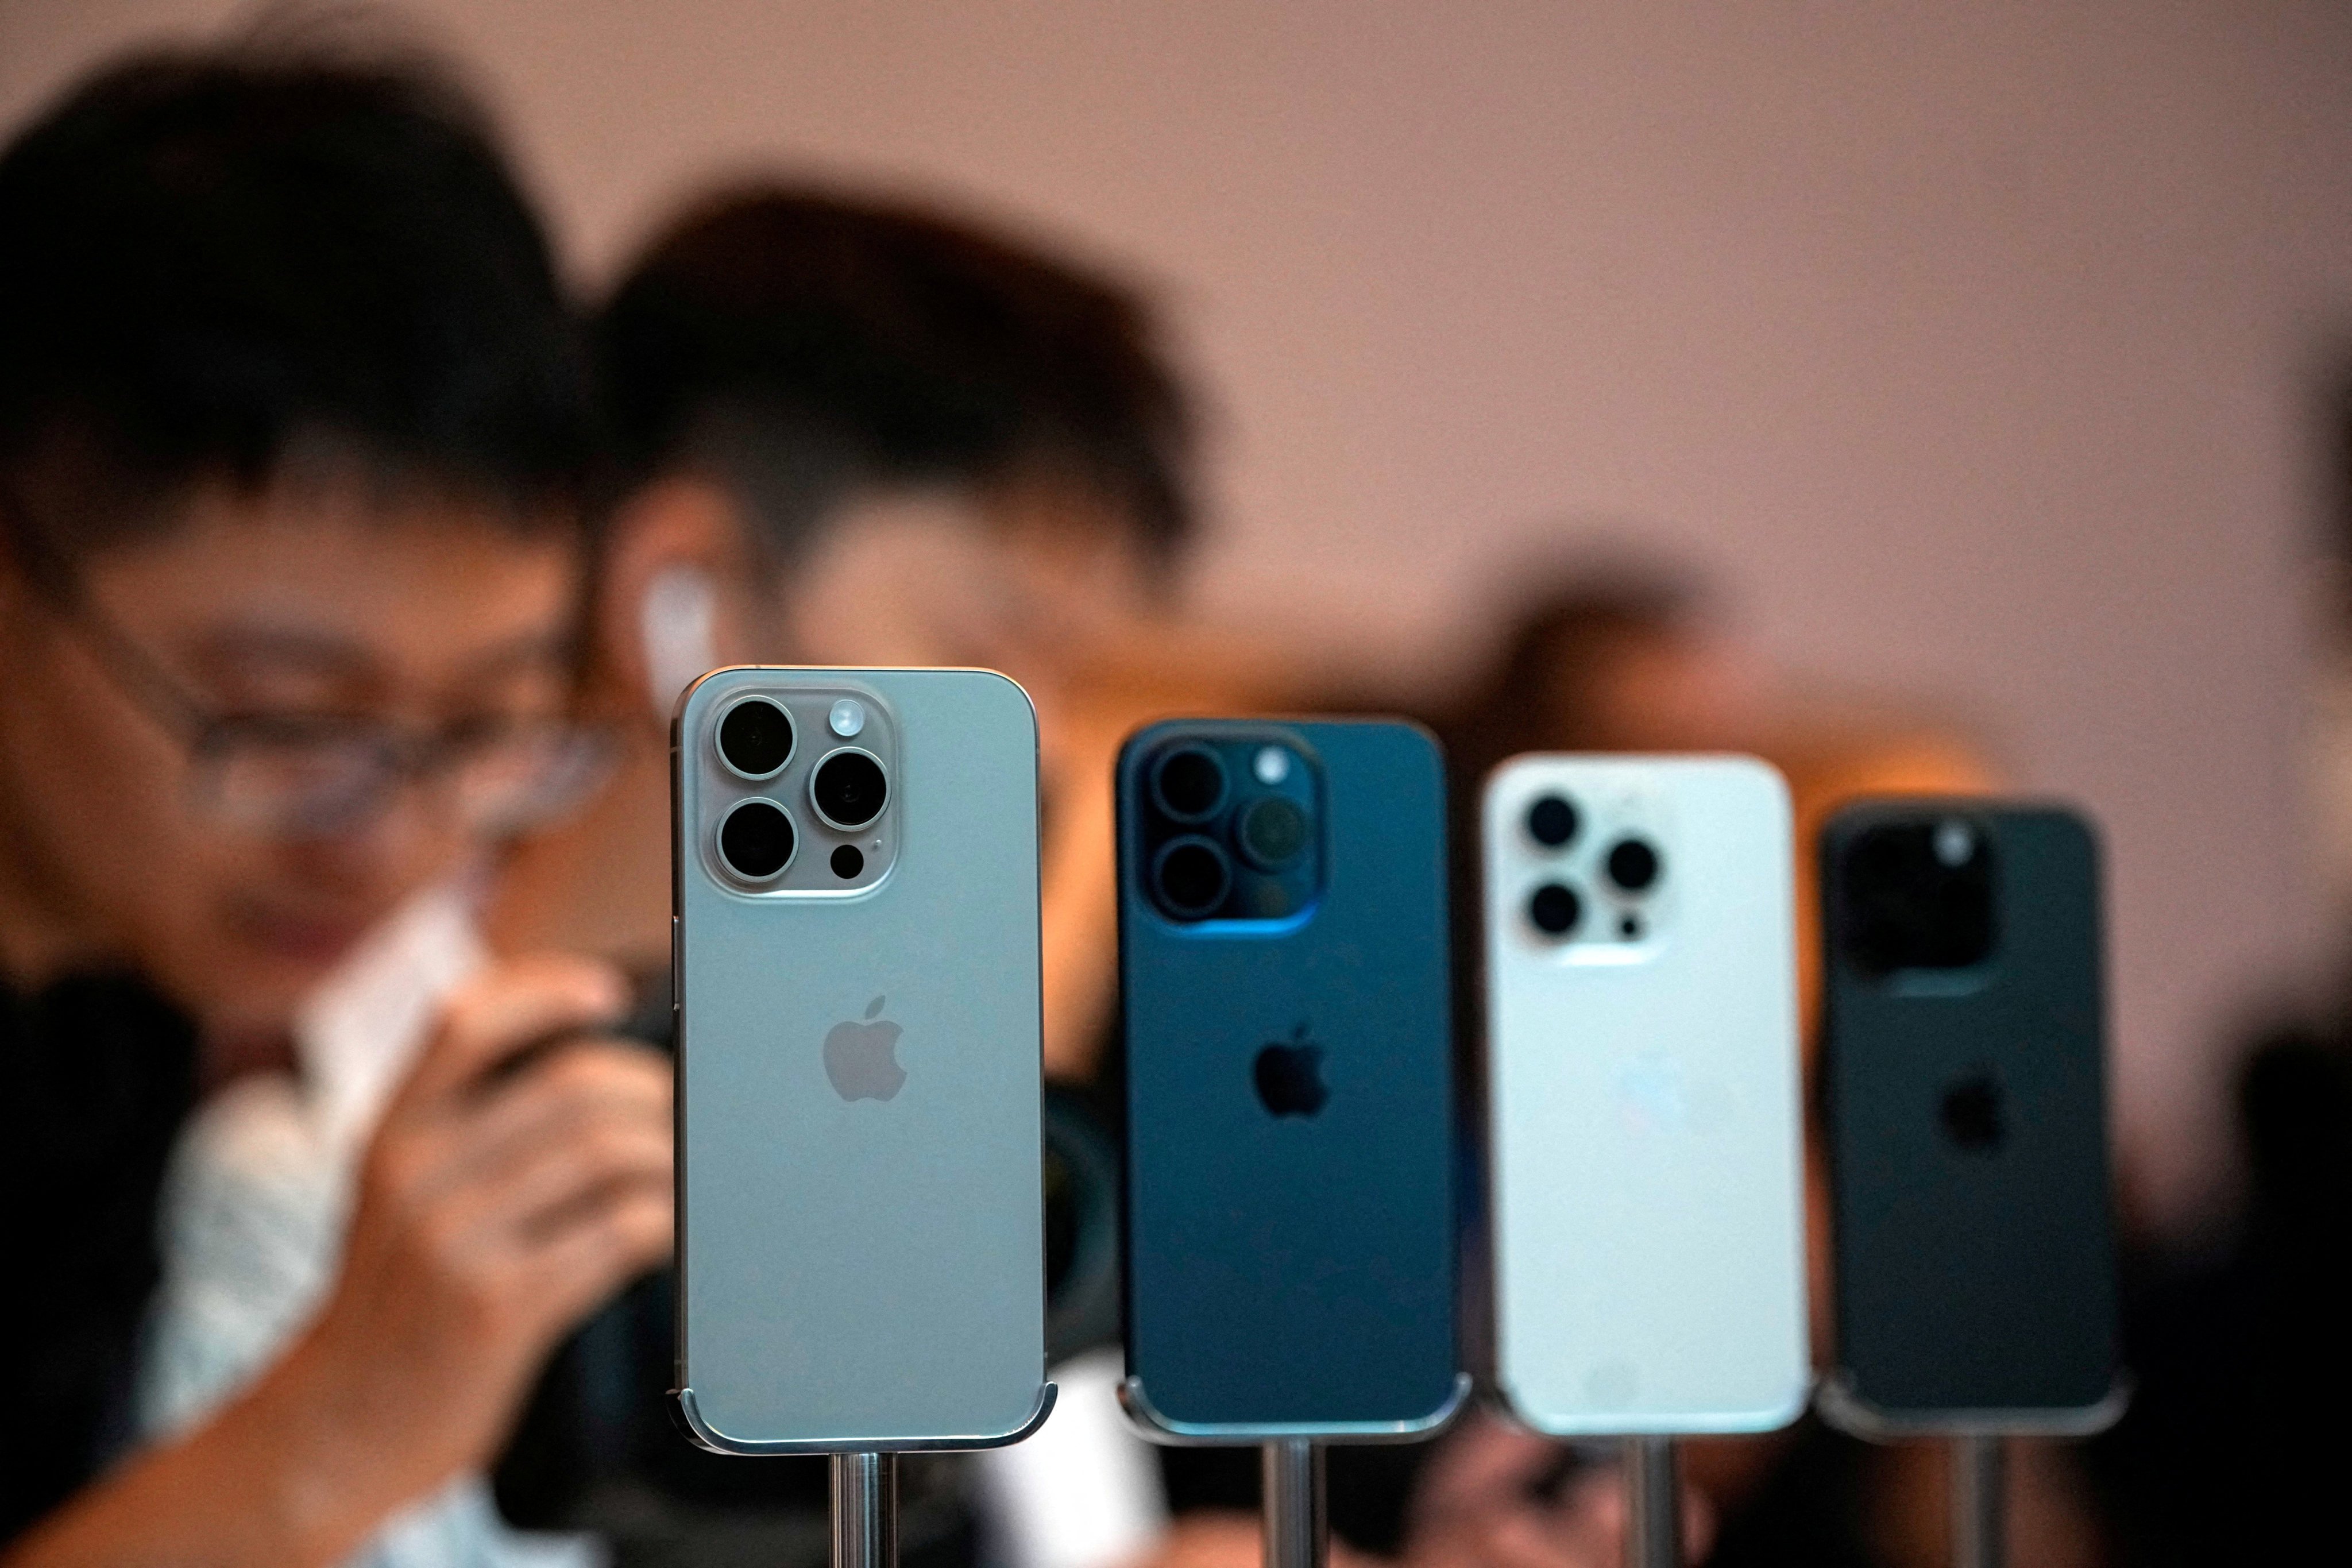 iPhones seen at an Apple store in Shanghai. Photo: Reuters